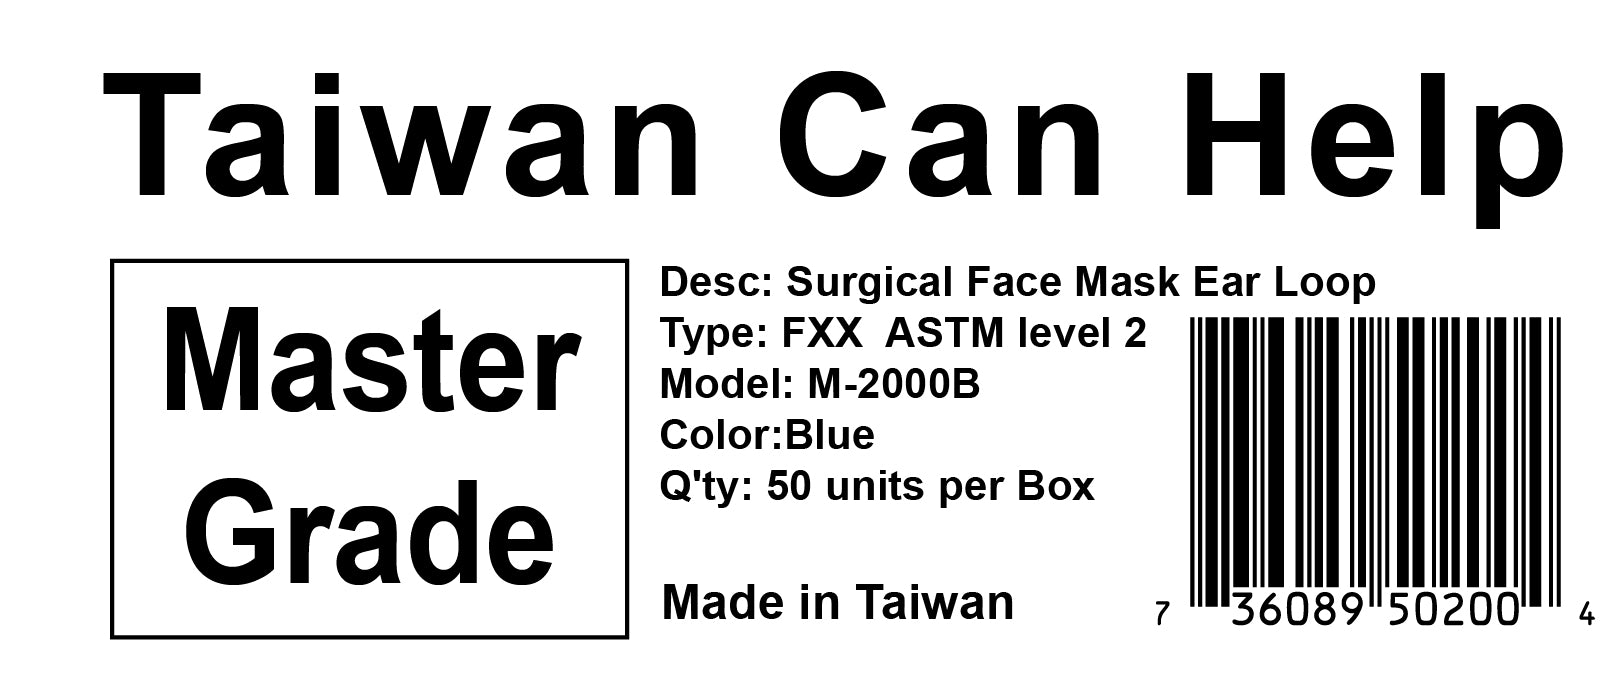 Why Taiwan Facemask  Is Different From Rest